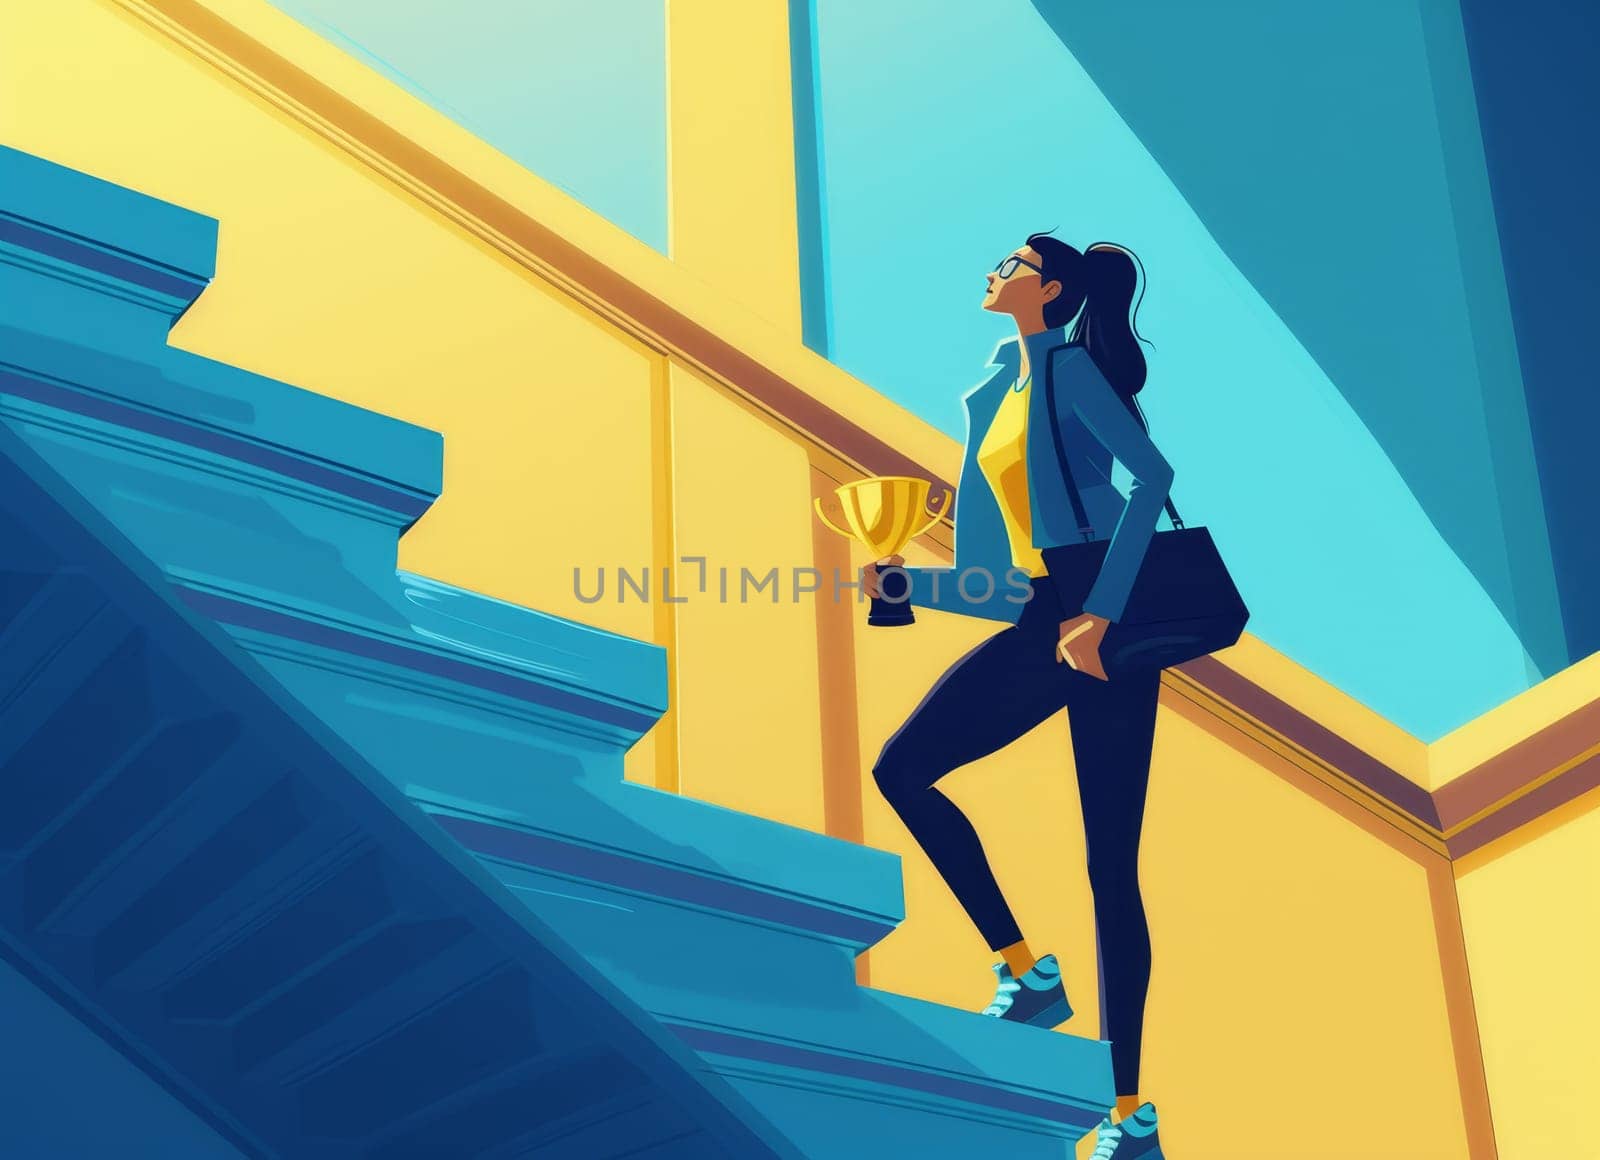 Stylized illustration of a woman on stairs with a trophy, symbolizing achievement. by sfinks